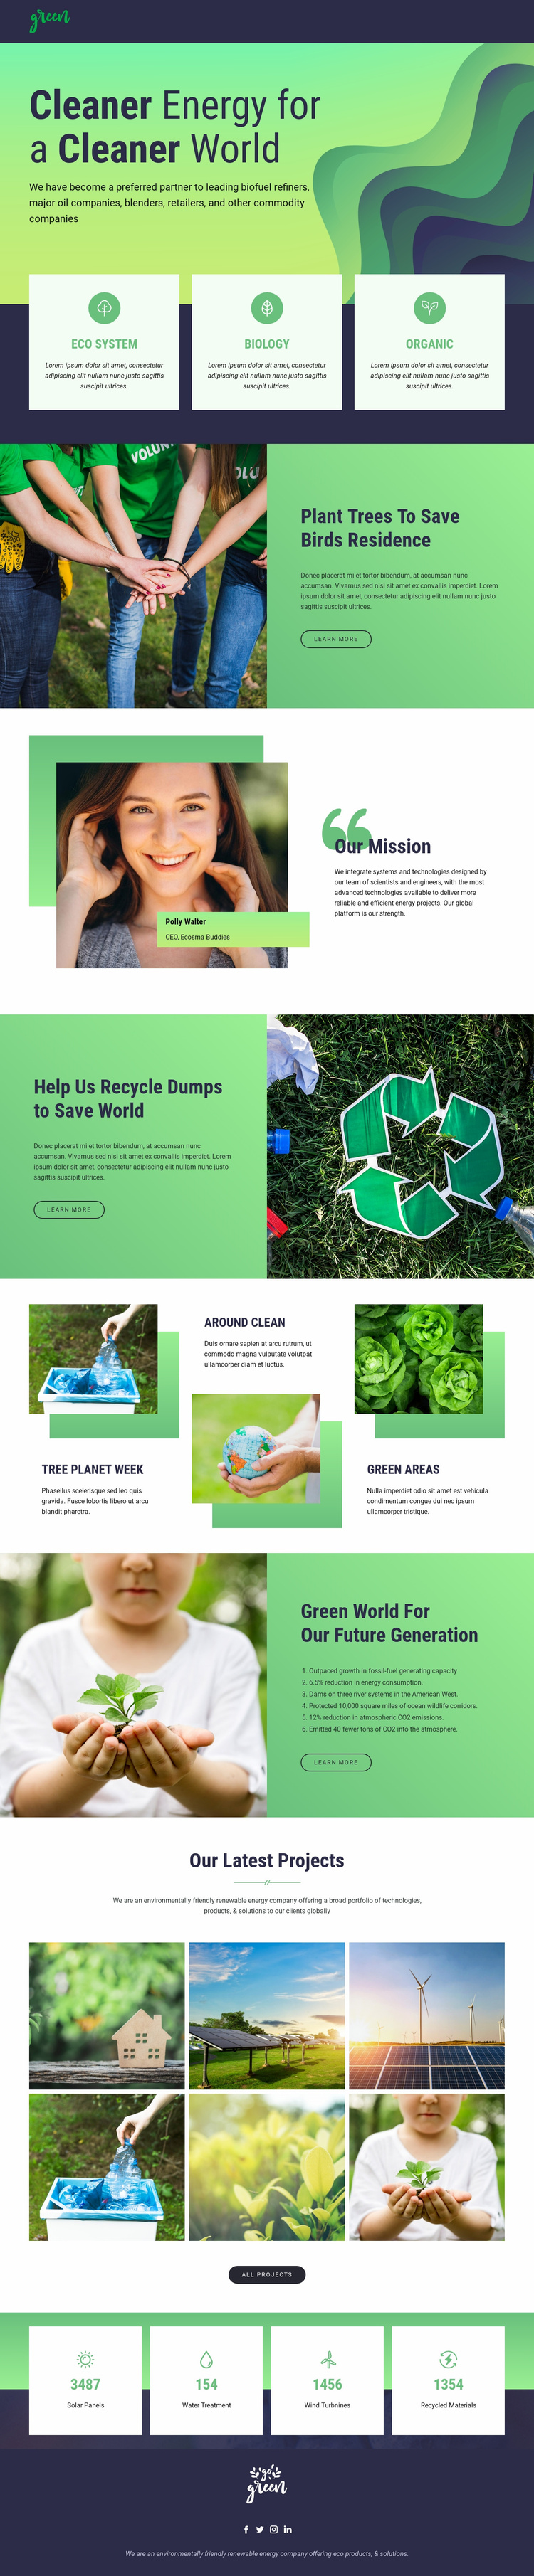 Clean energy to save nature Website Template